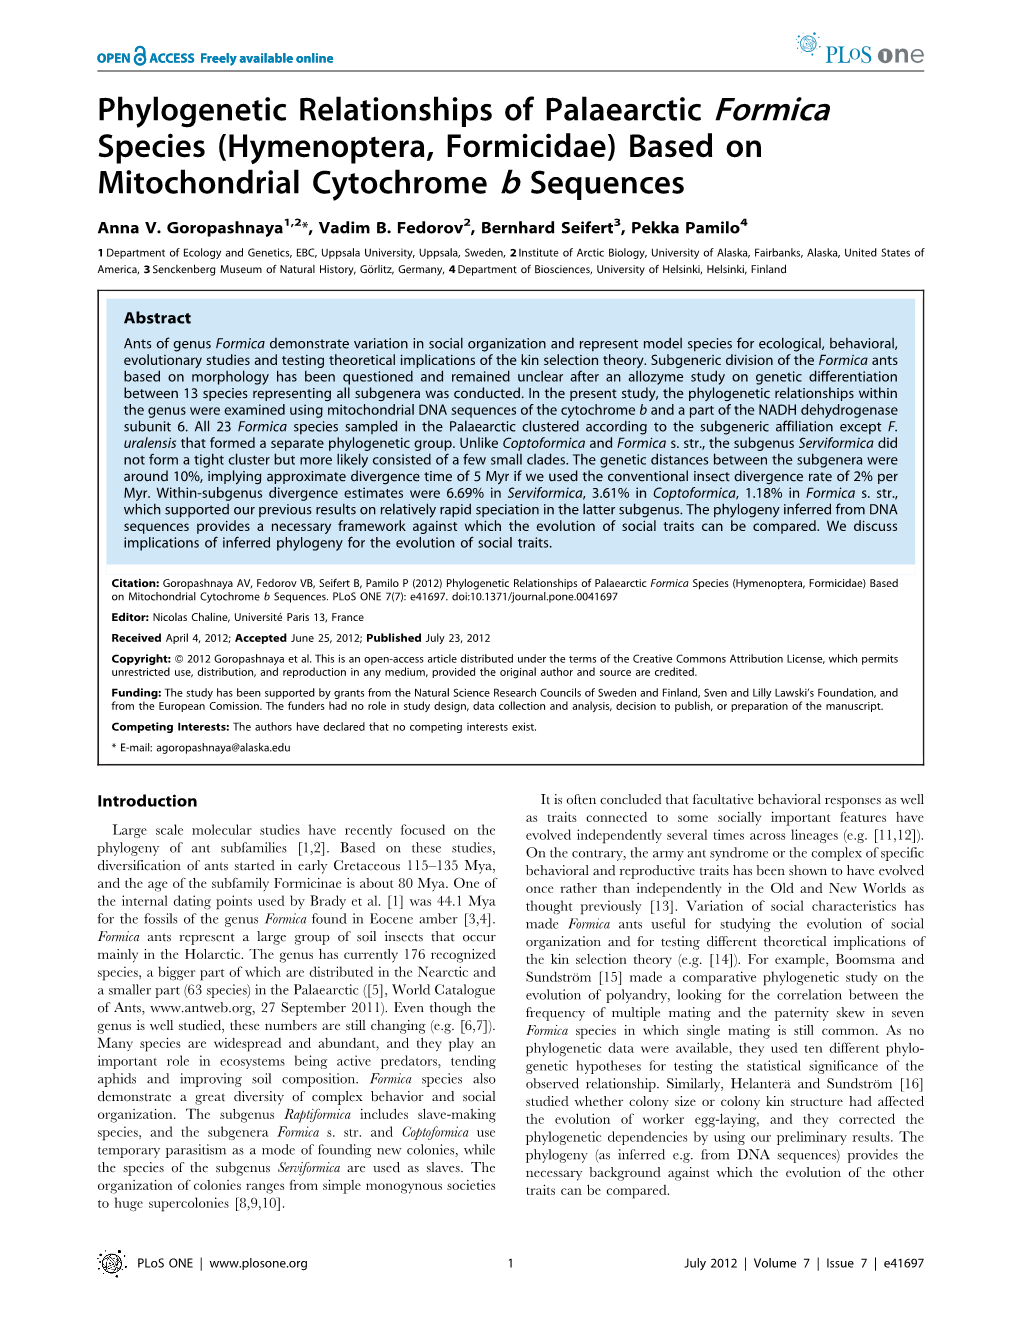 Phylogenetic Relationships of Palaearctic Formica Species (Hymenoptera, Formicidae) Based on Mitochondrial Cytochrome B Sequences